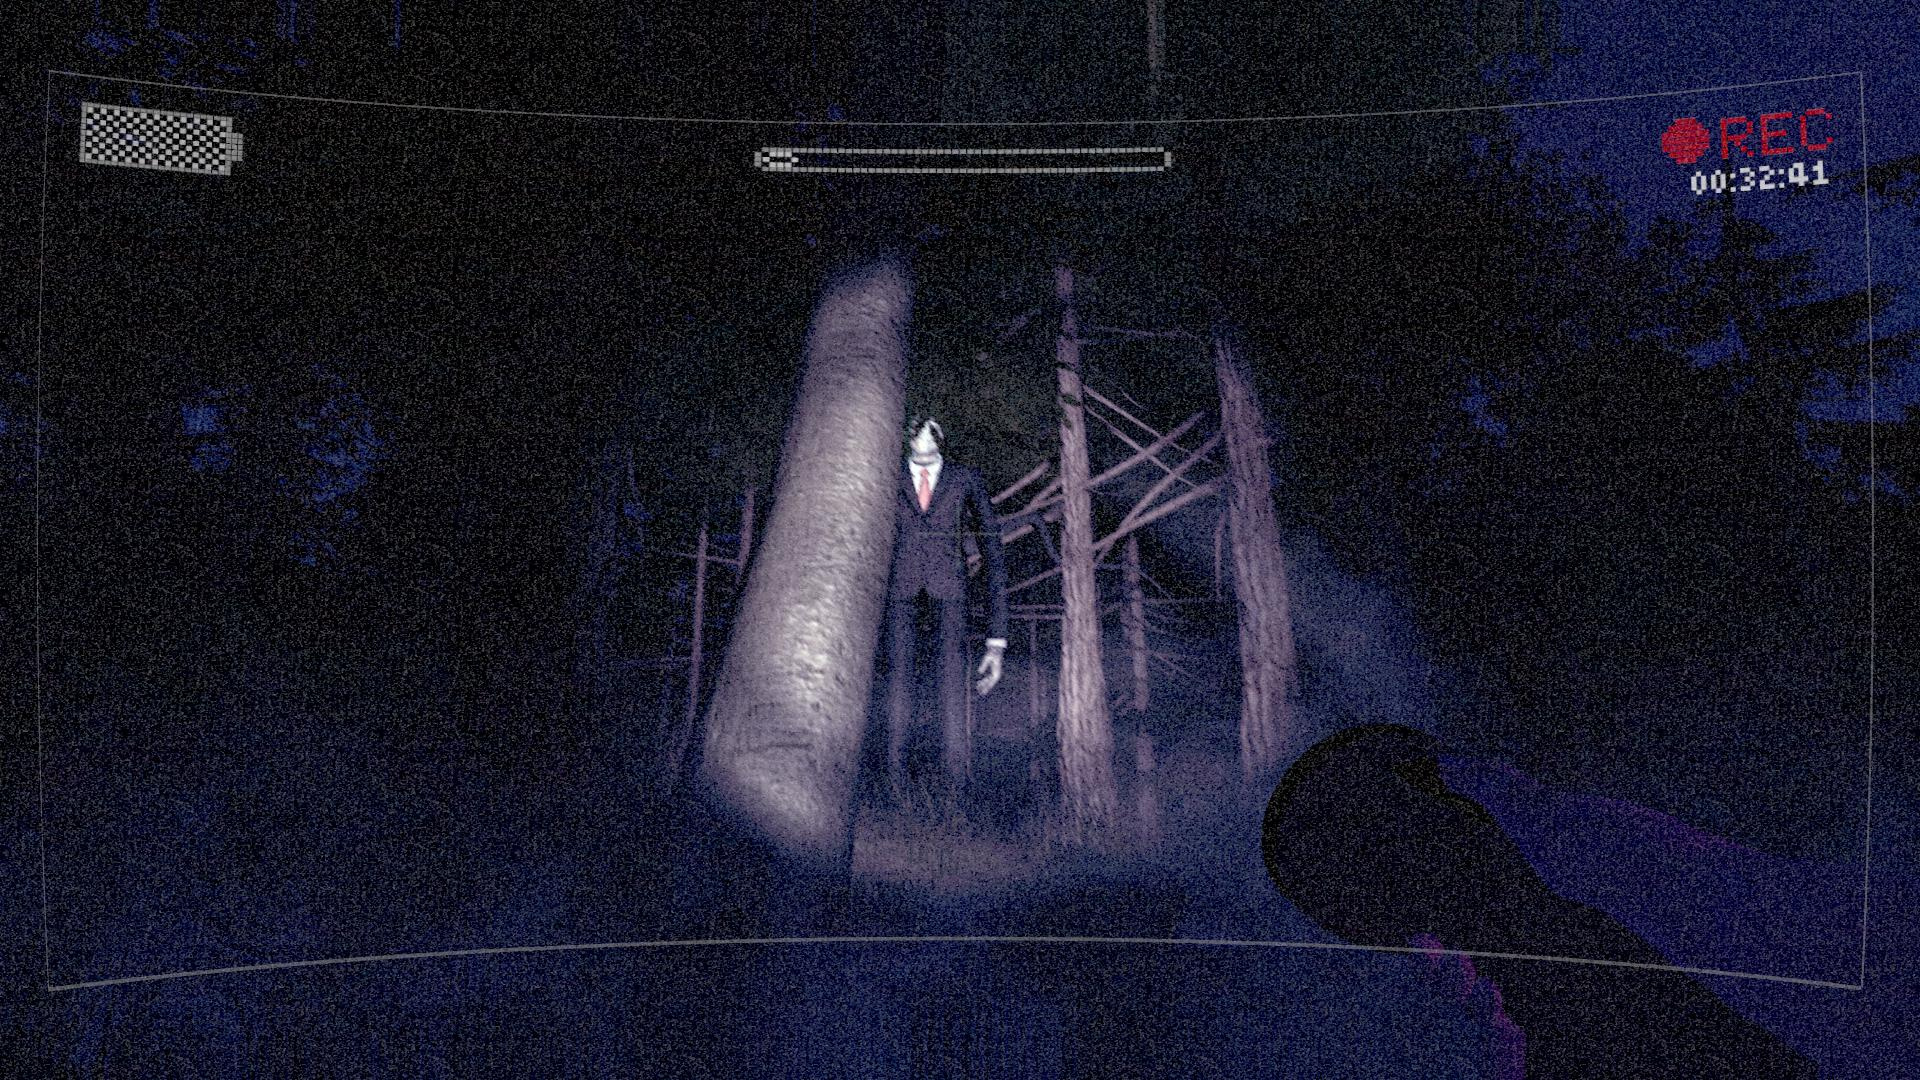 Slender The Arrival Is Stalking Its Way To The Wii U Eshop Nintendo Life - roblox jumpscare slender man